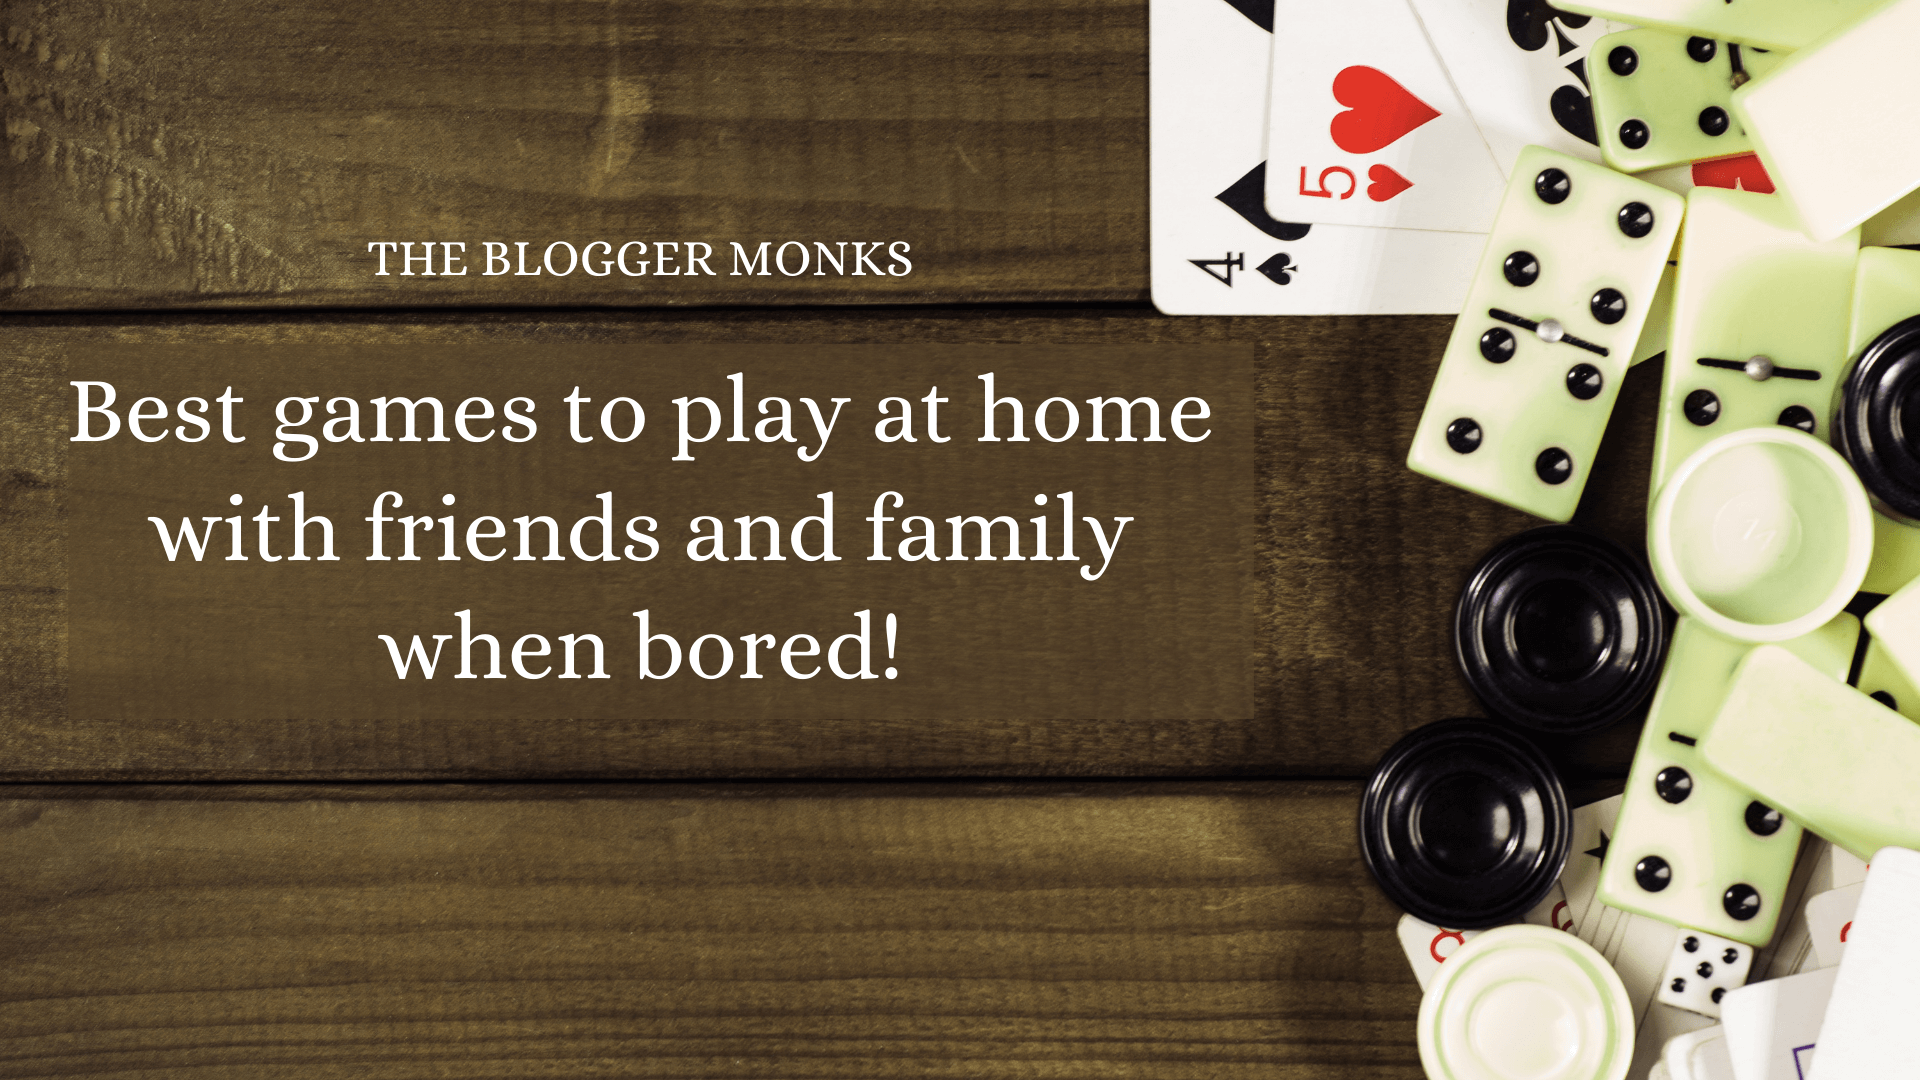 Best games to play at home with friends and family when bored